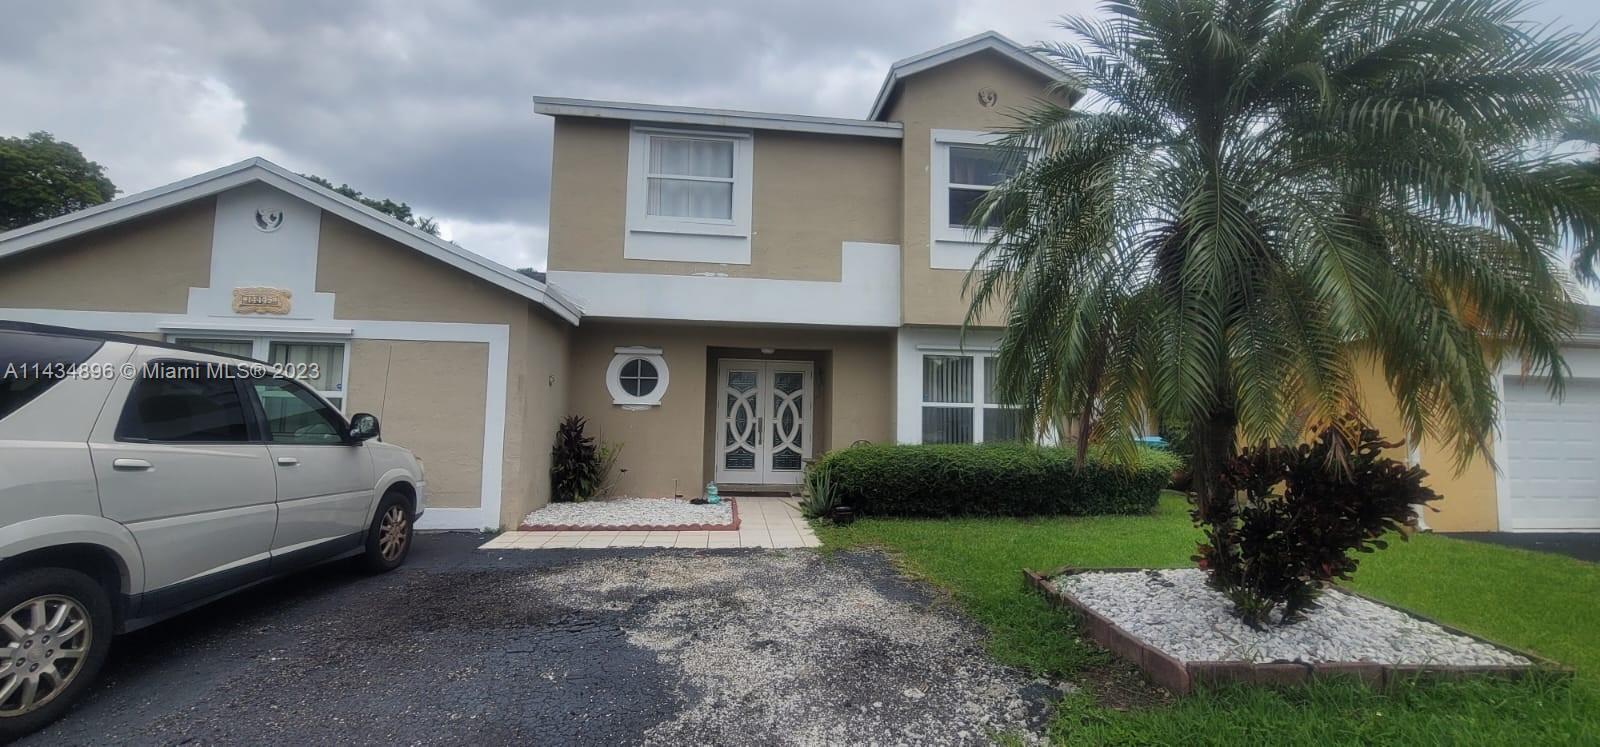 Photo 1 of 14445 SW 92nd Ter in Miami - MLS A11434896